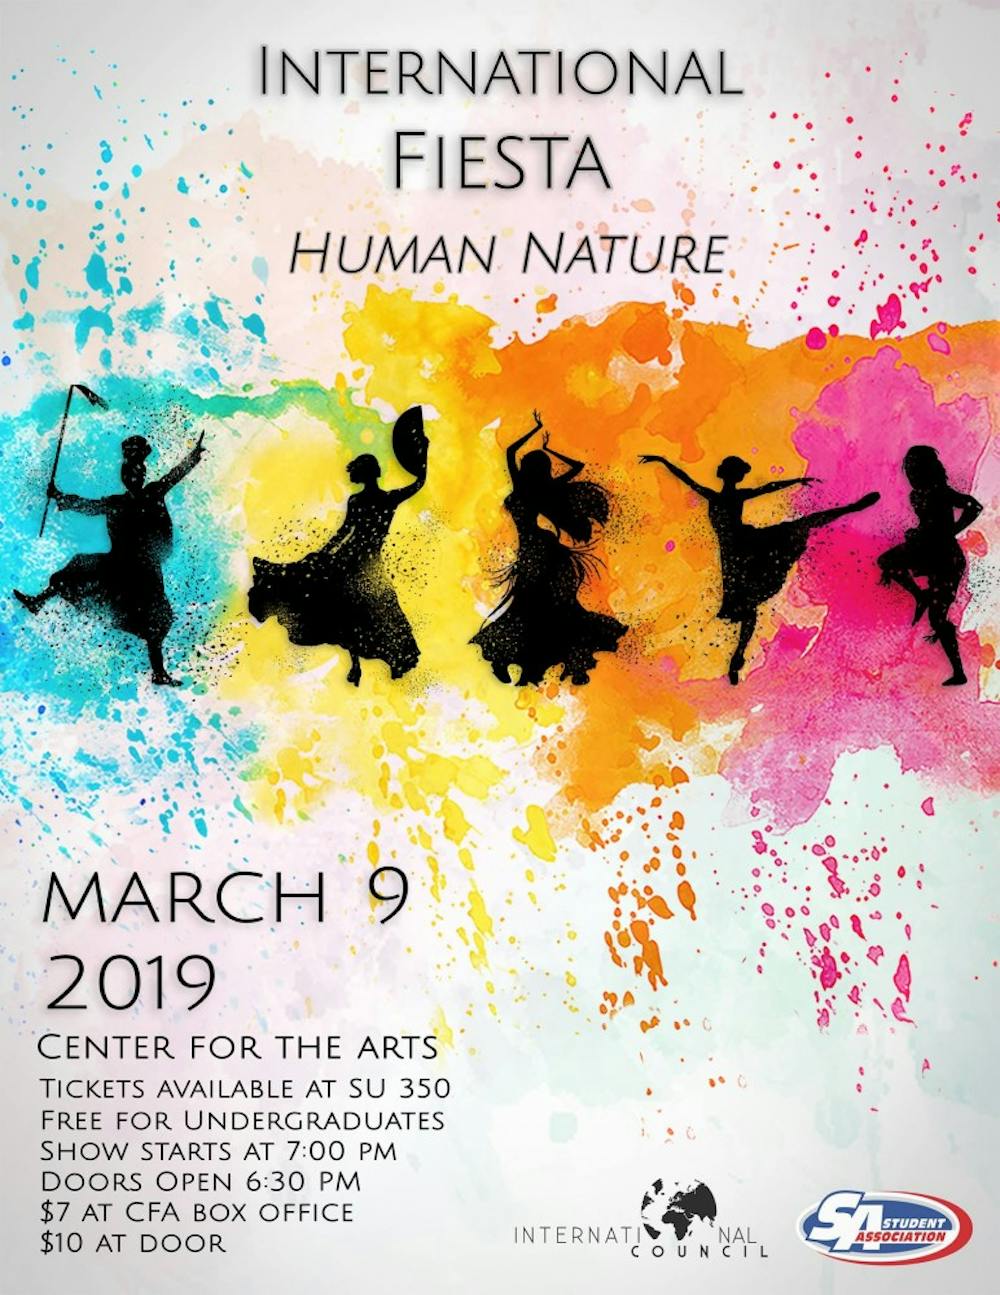 <p>International Fiesta will take place in the Center for the Arts on Saturday night, with 15 clubs participating in the “Human Nature” dance competition.&nbsp;</p>